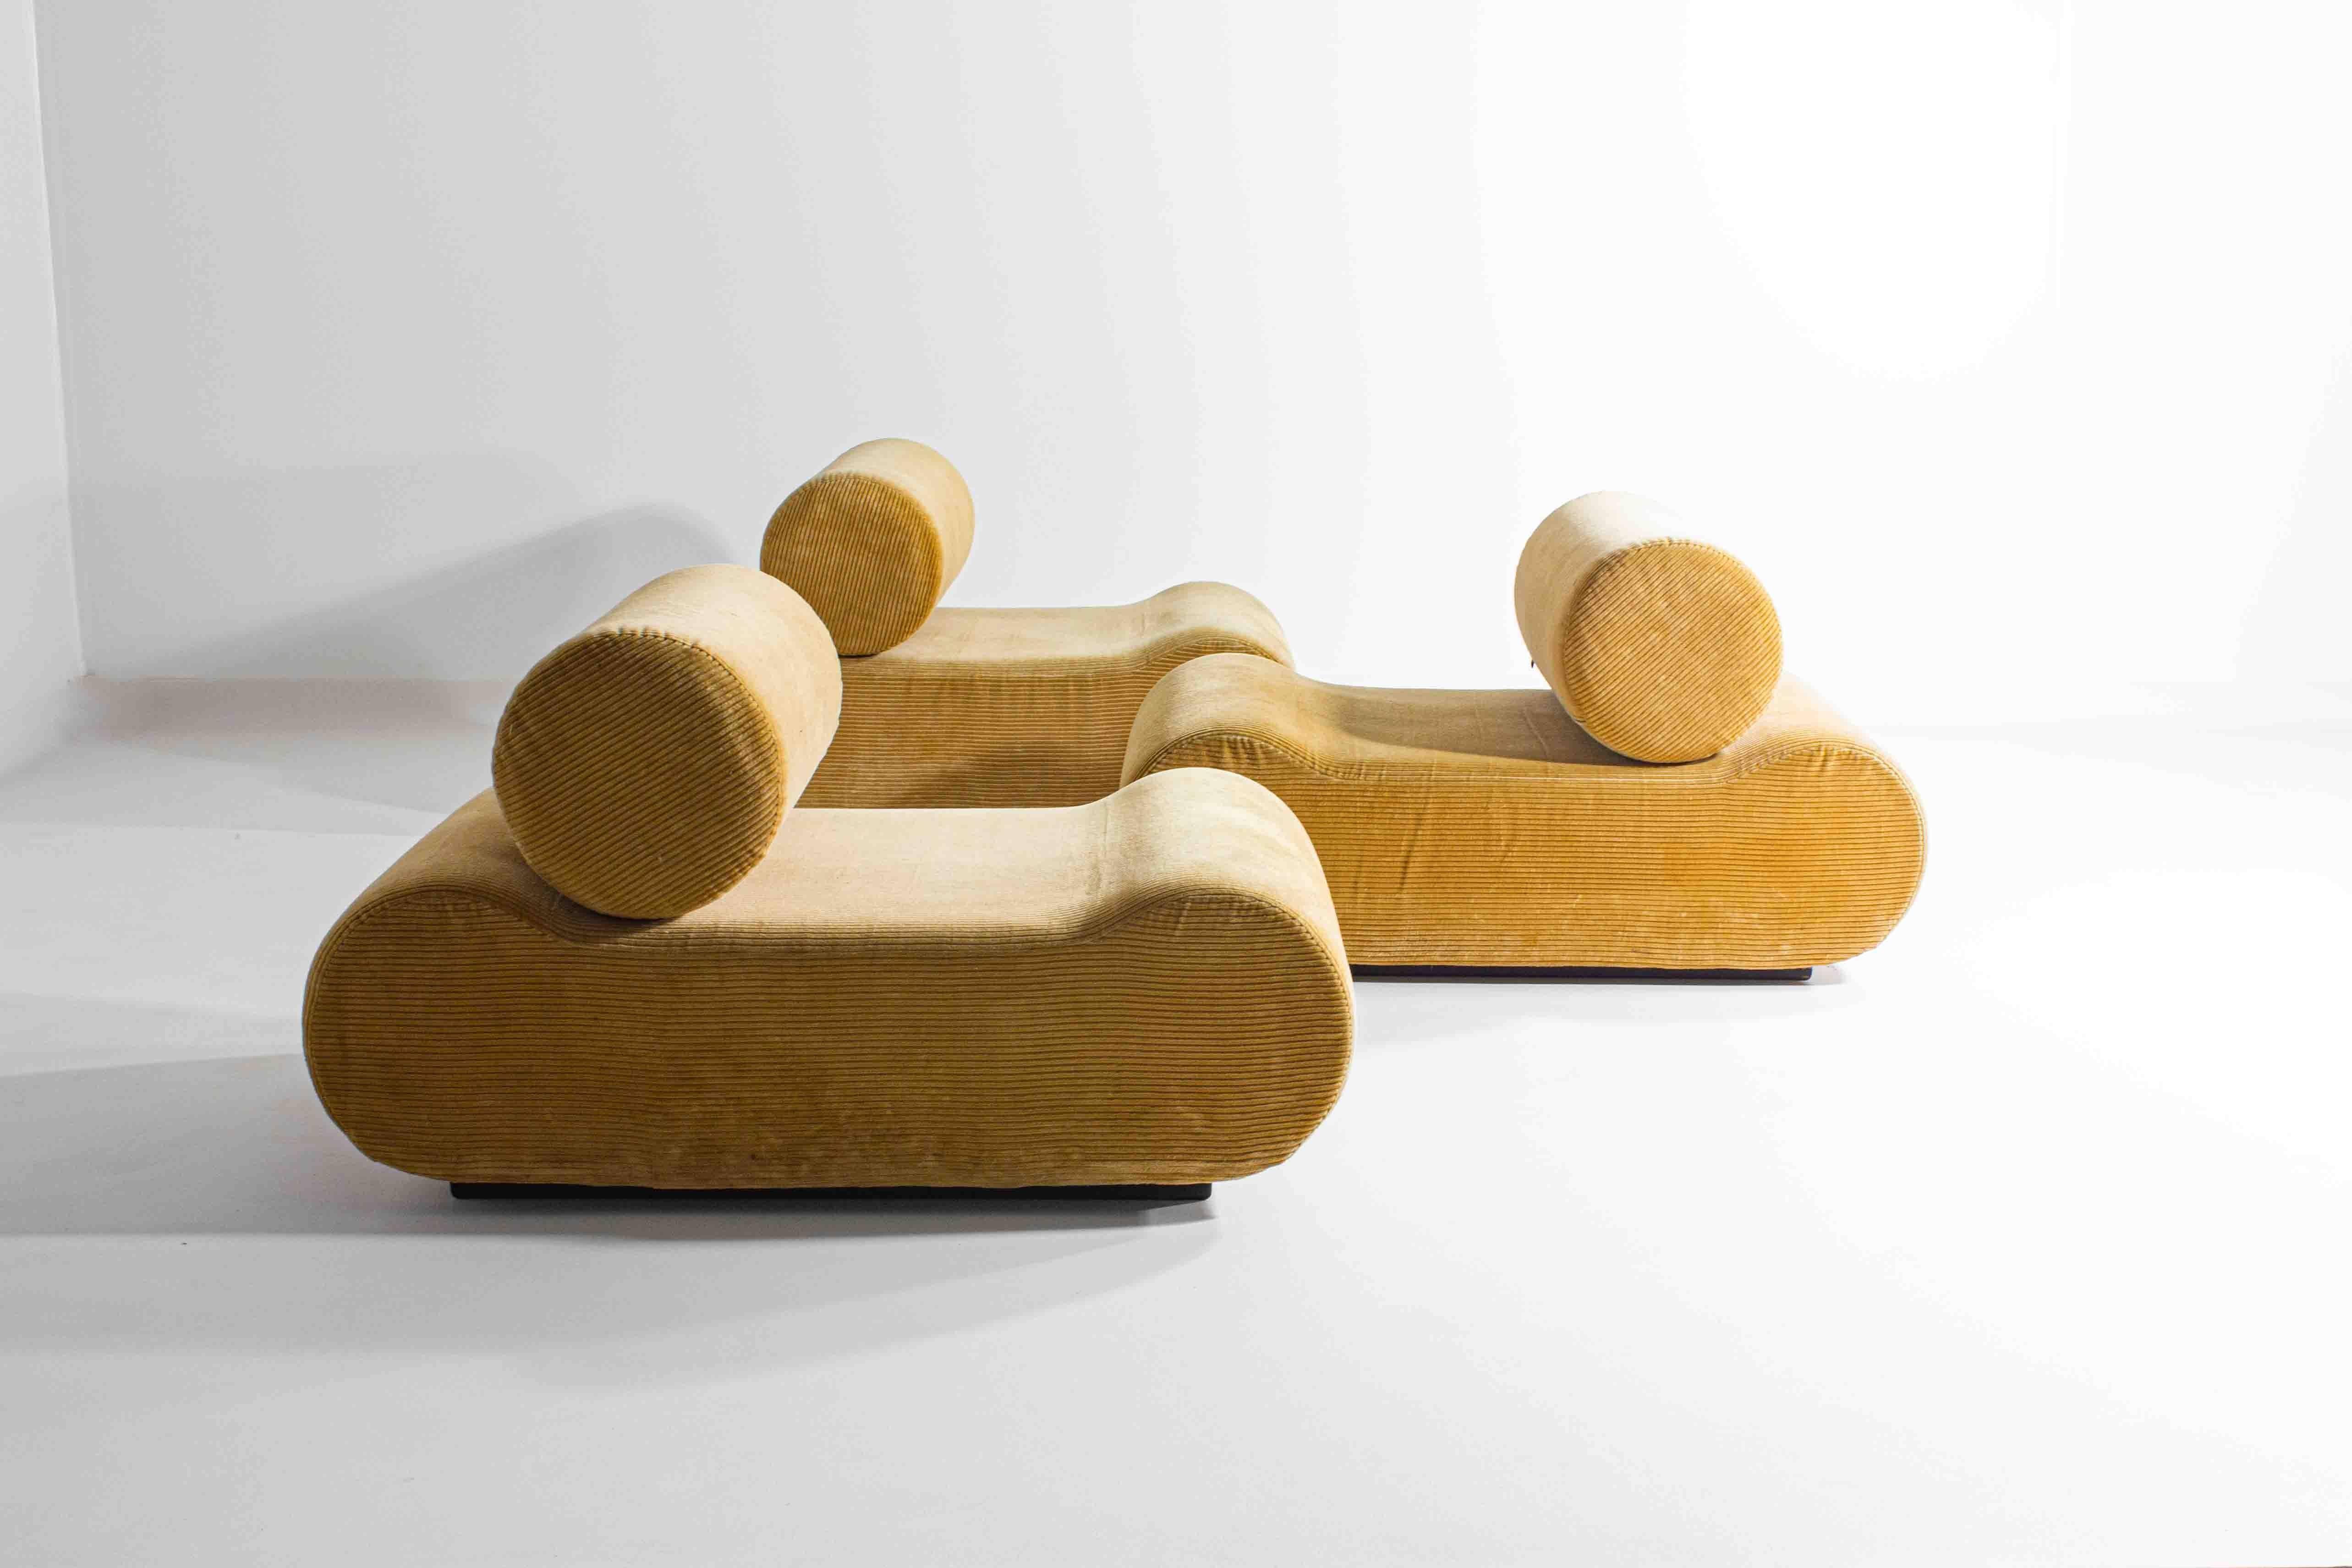 Discover the “Corbi” Sofa by Klaus Uredat for Cor Trio, a modular marvel of 1969. Its playful modules, clad in the original Naples yellow velour fabric, offer different configurations to match your space and style. The fun interplay of cylindrical